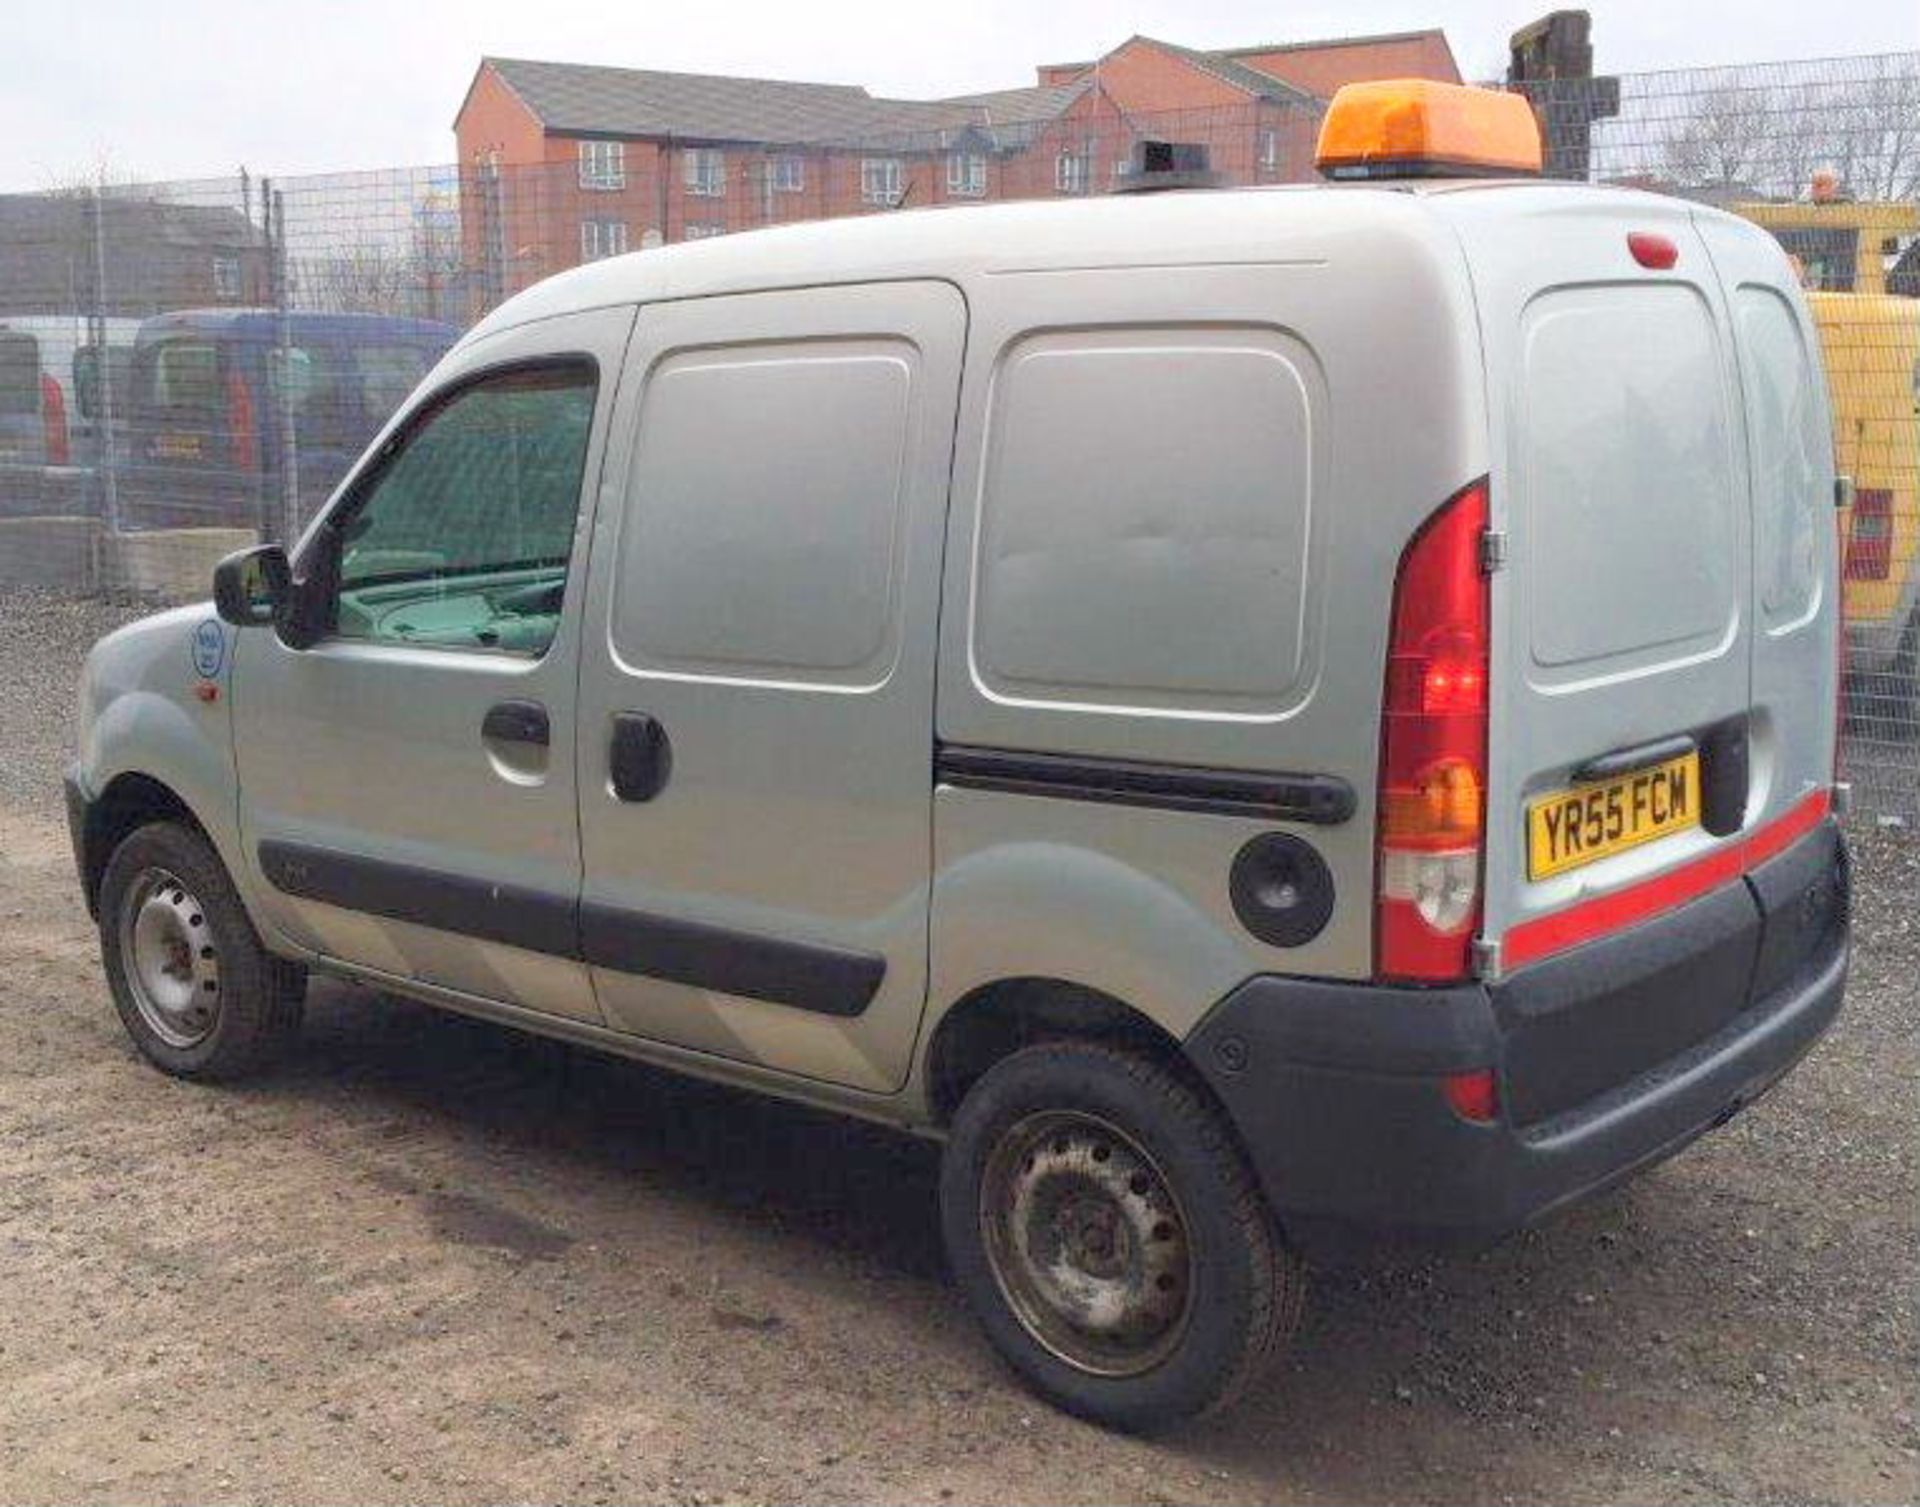 A Renault Kangoo SL19 dCi 80 4x4 Van Reg. No.YR55FCM, first registered 30/11/2005, indicated 169,885 - Image 3 of 7